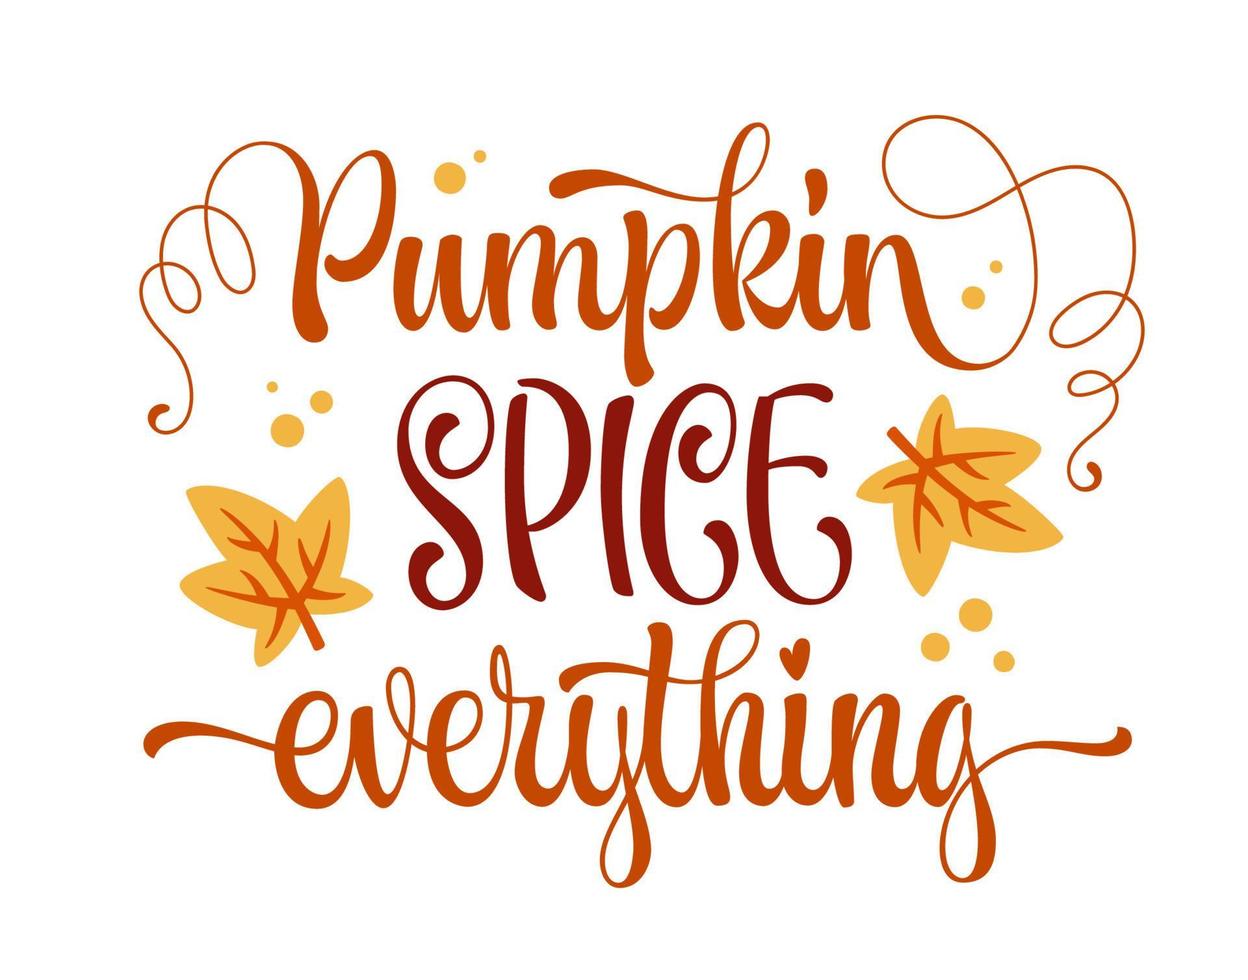 Pumpkin spice everything trendy season typography illustration for any purposes. vector